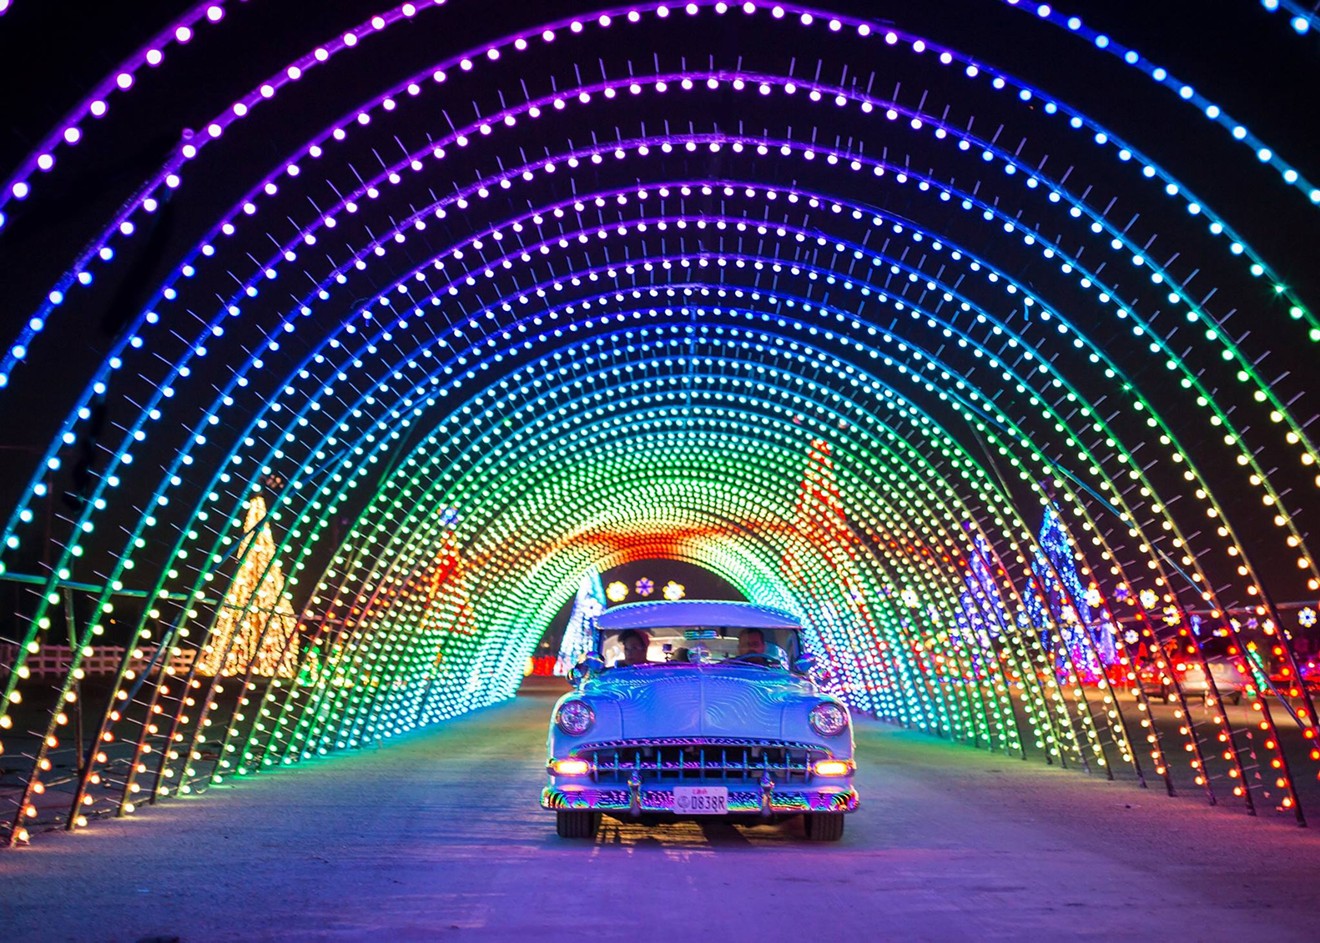 Enjoy vroom with a view at Christmas in Colorado.